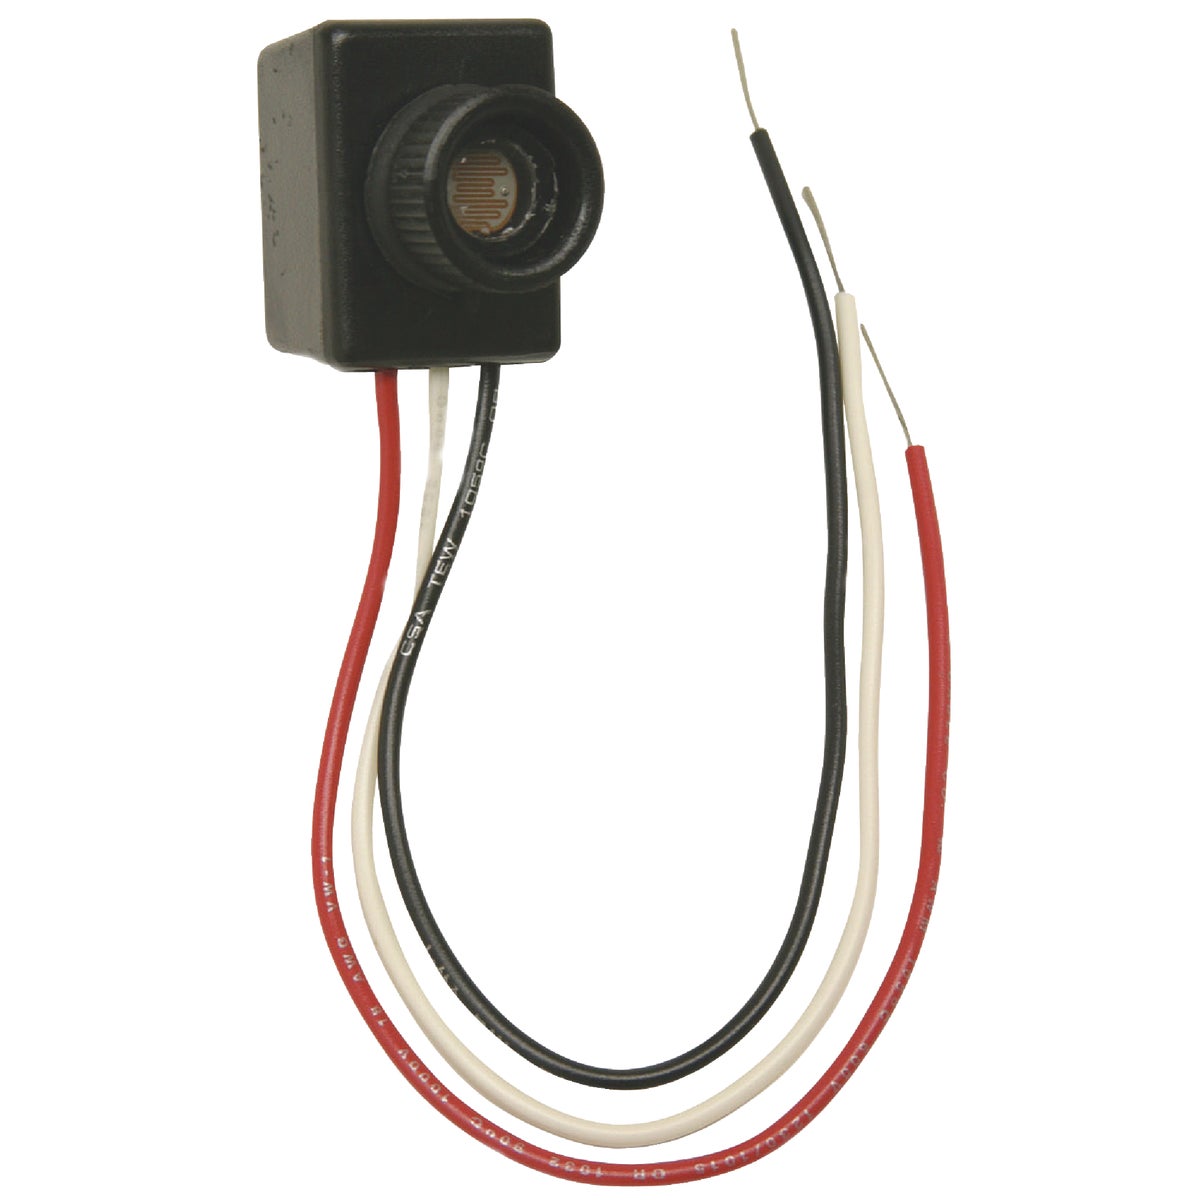 Item 502006, Lamp post photo control. Will fit a 5/8-inch or 7/8-inch knockout.